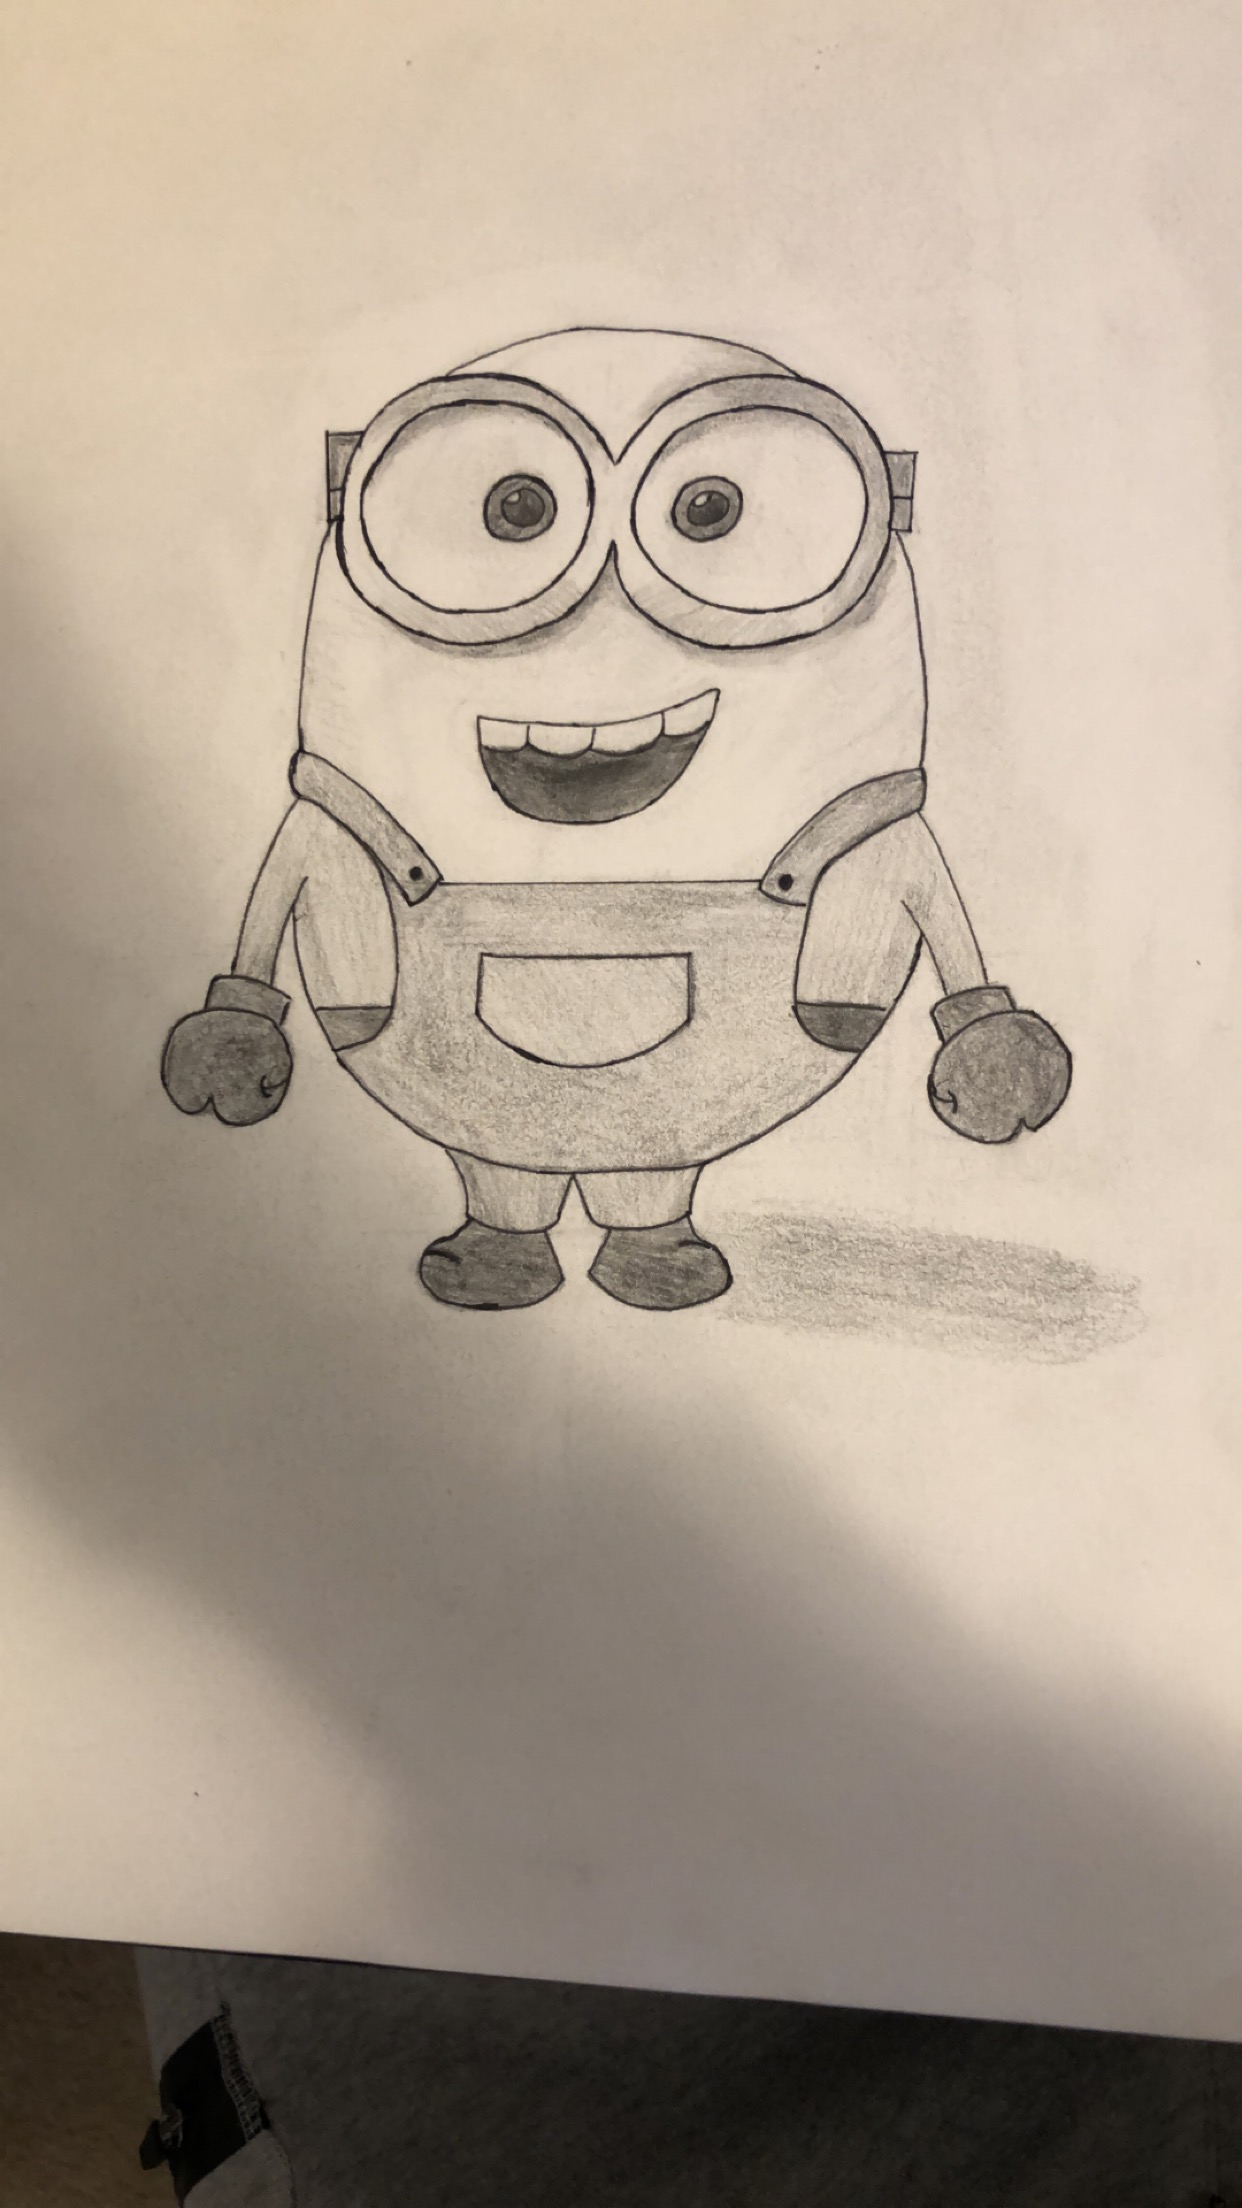 Minions pencil drawing by dubz002 on DeviantArt | Minion drawing, Minion  sketch, Minions